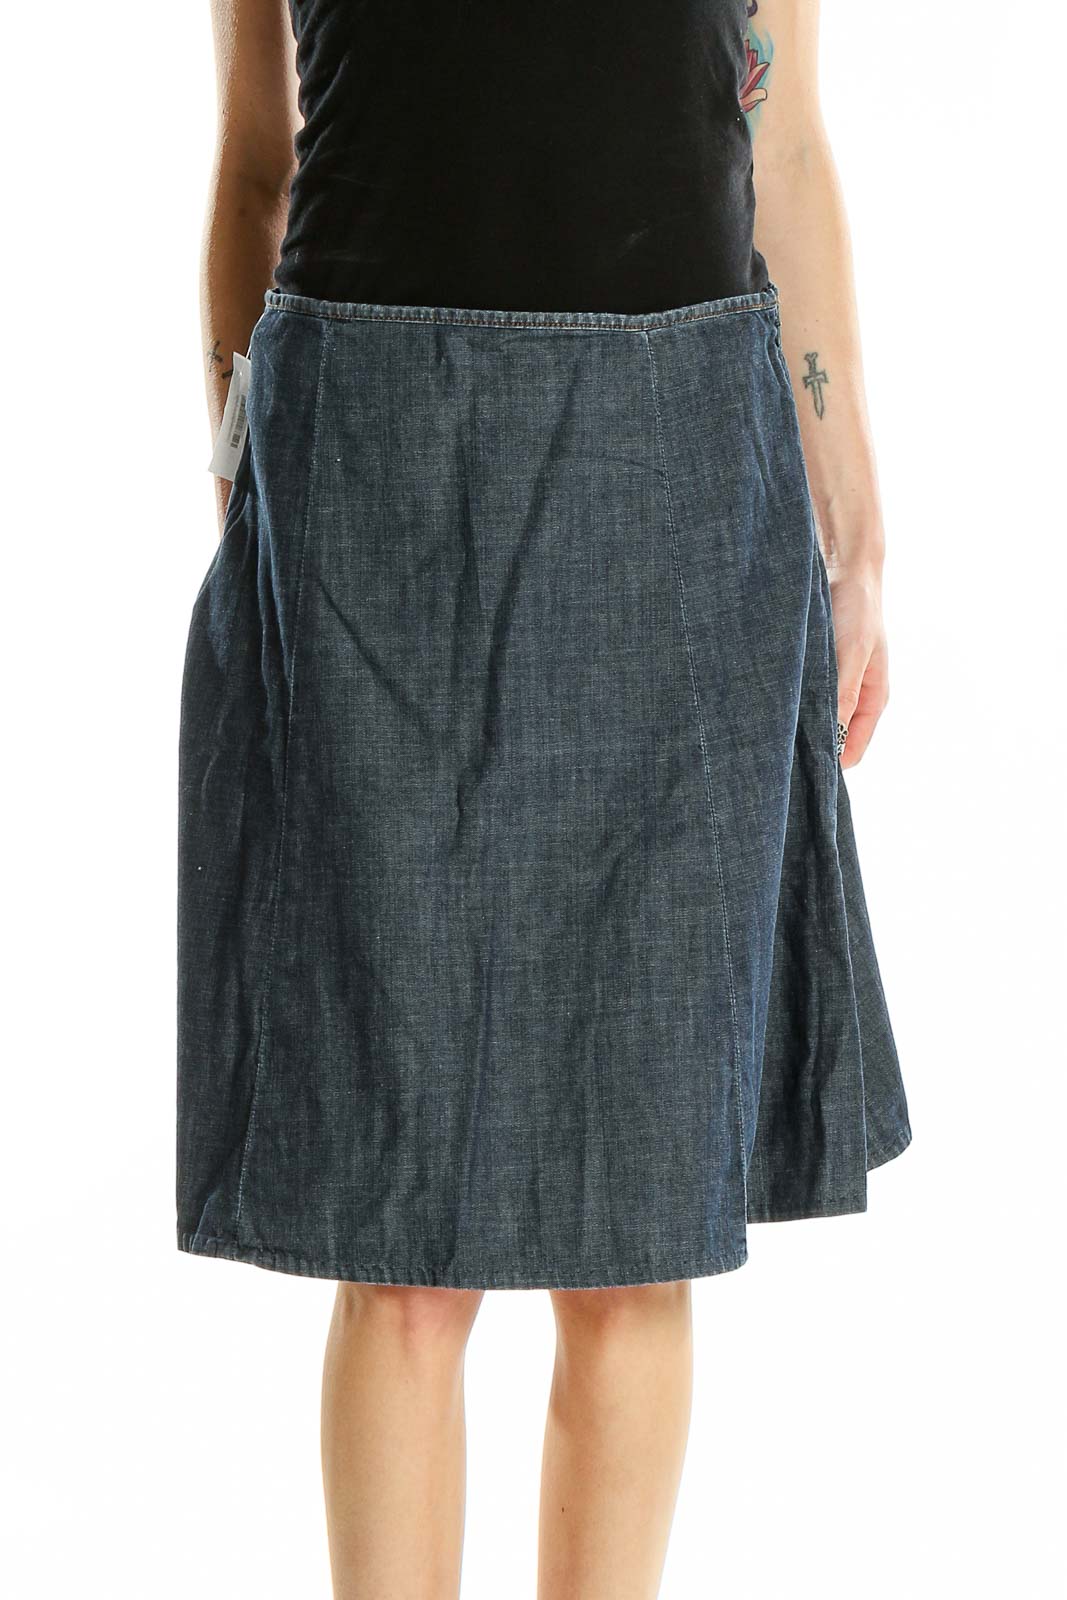 Blue Chambray A-Line Skirt Front